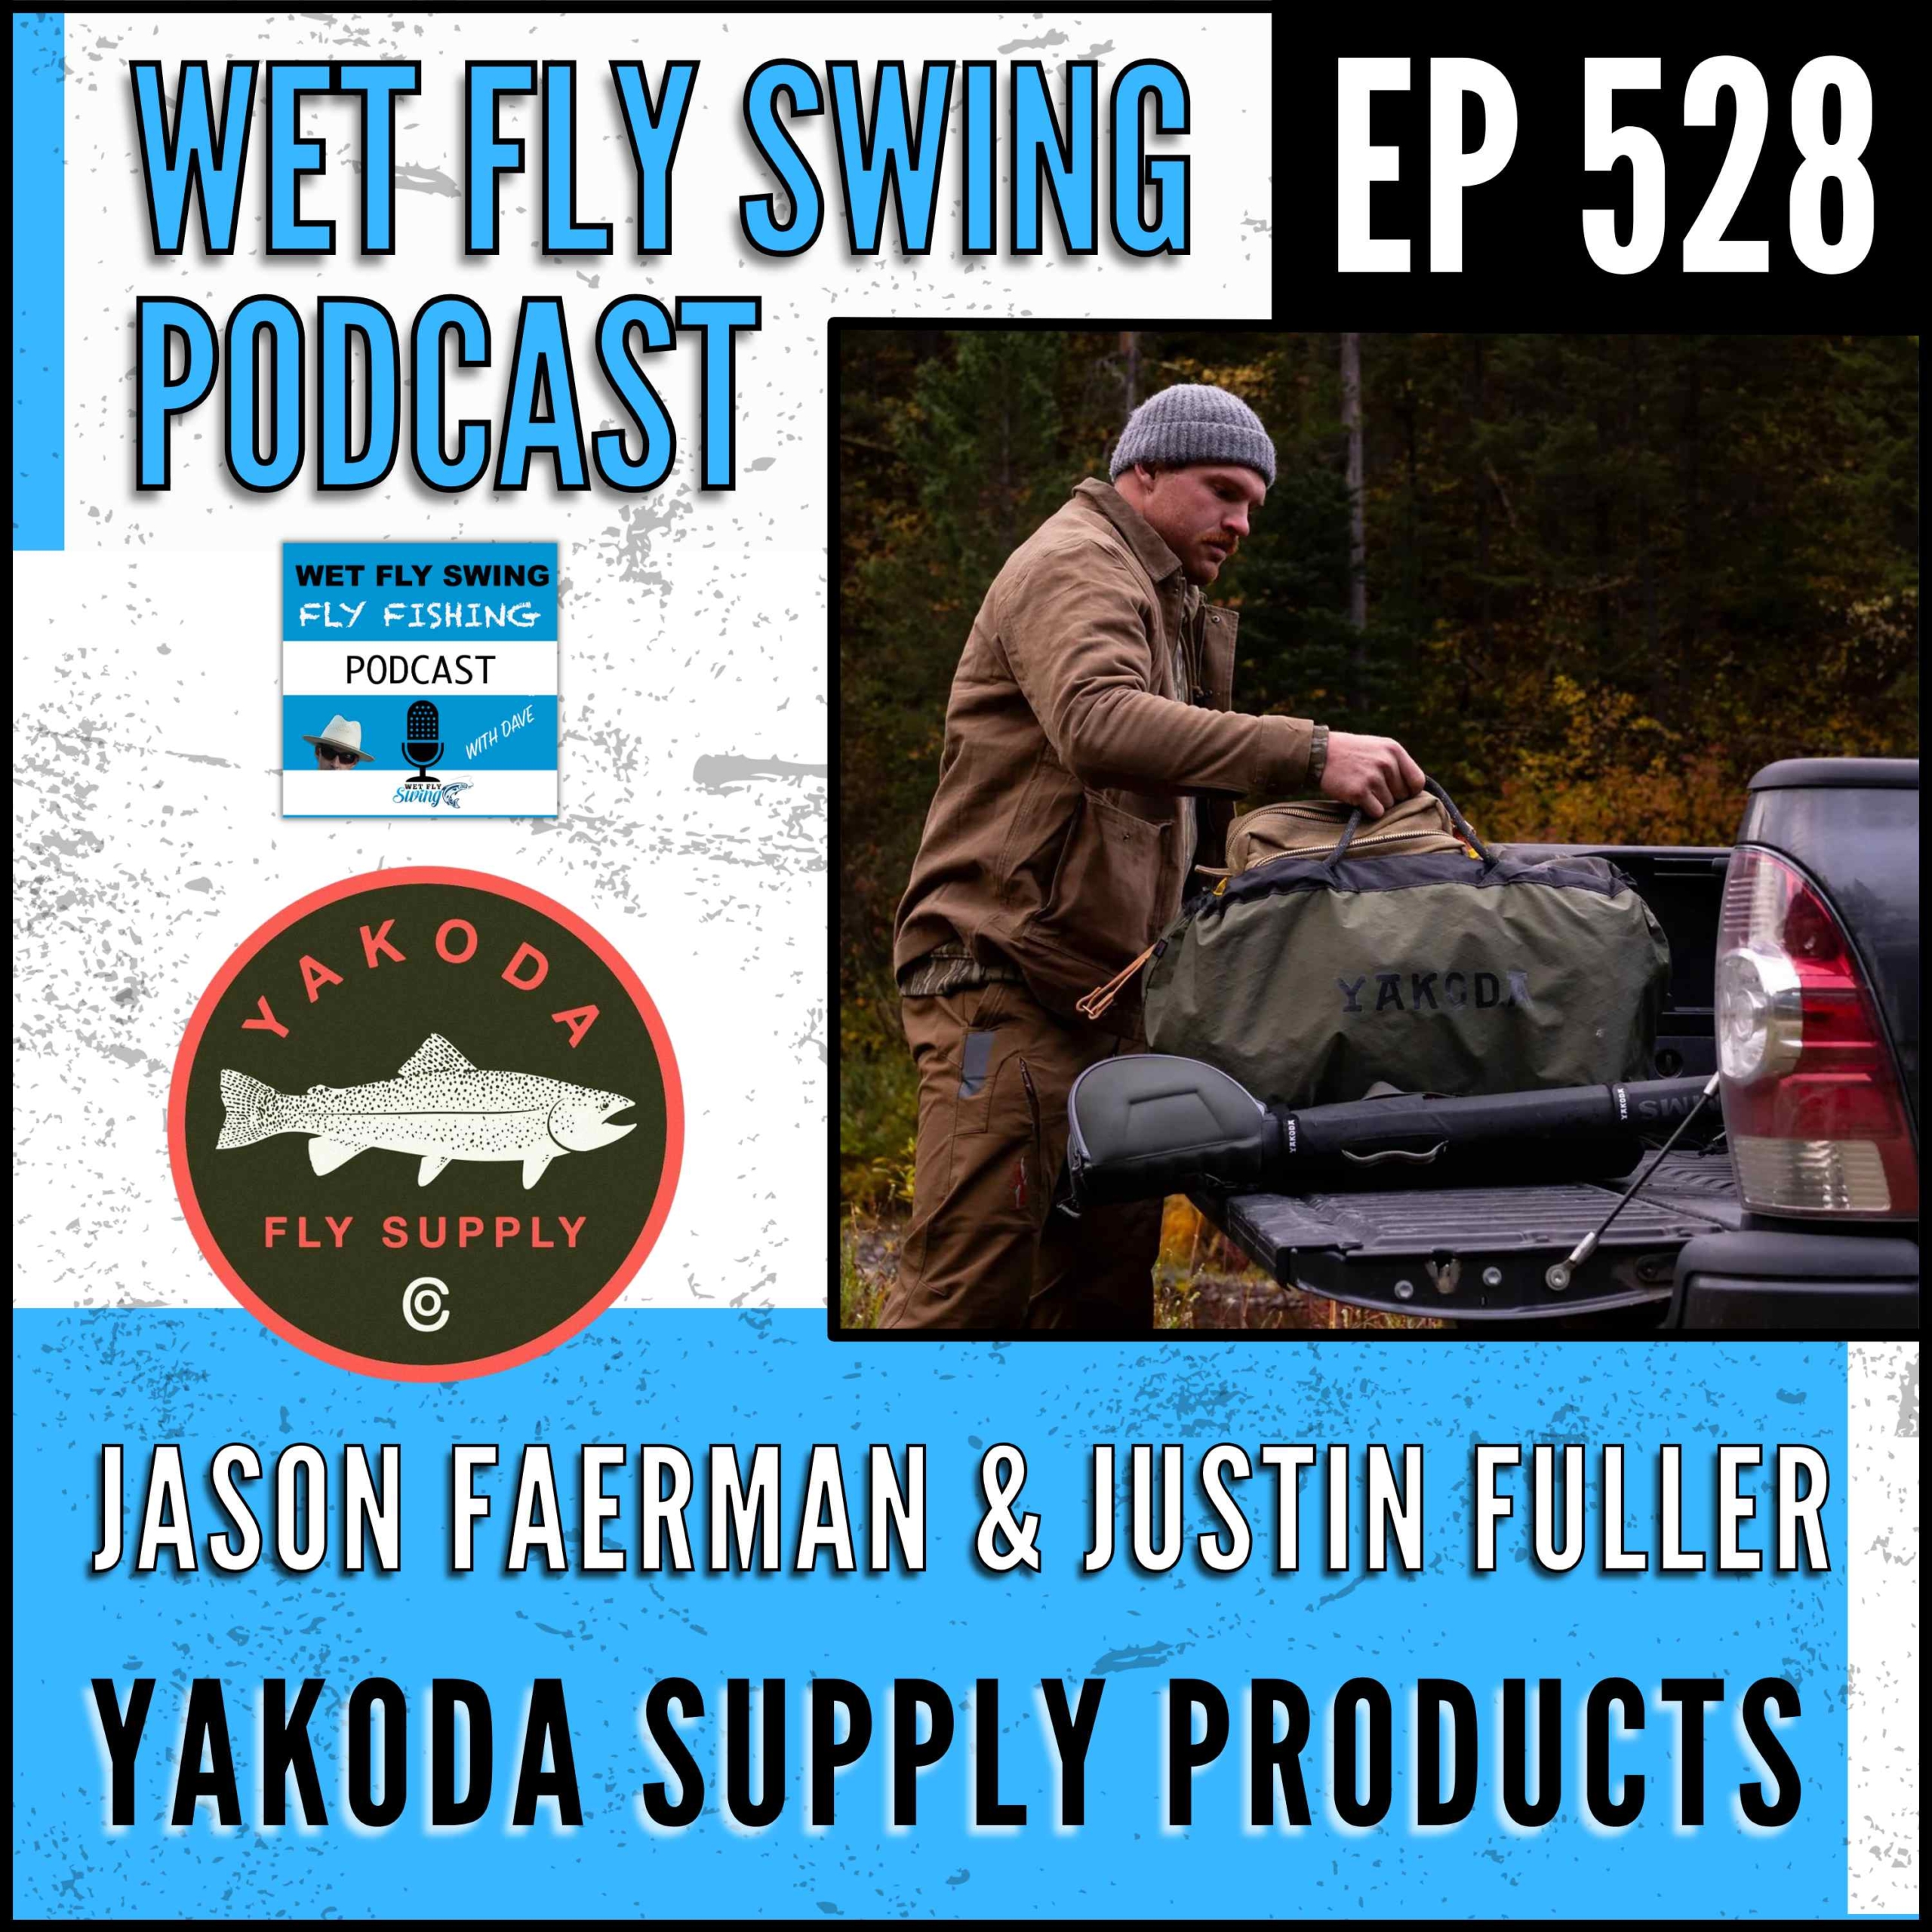 WFS 528 - Yakoda Supply Products with Jason Faerman and Justin Fuller - Fly  Tying, Outdoor Gear, Colorado 